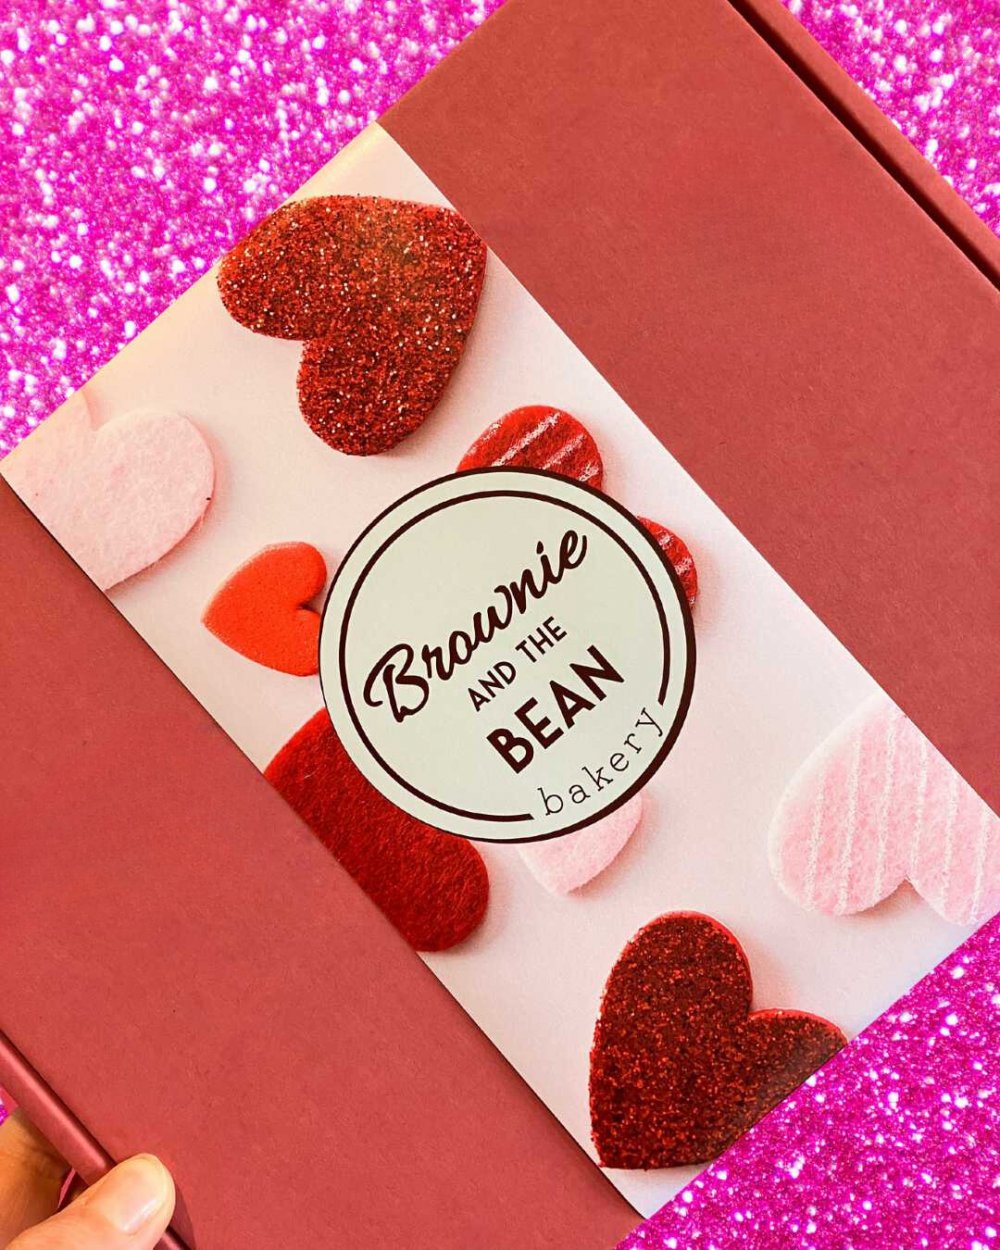 Valentine's Day Brownie Box with pink glittered background and hearts.